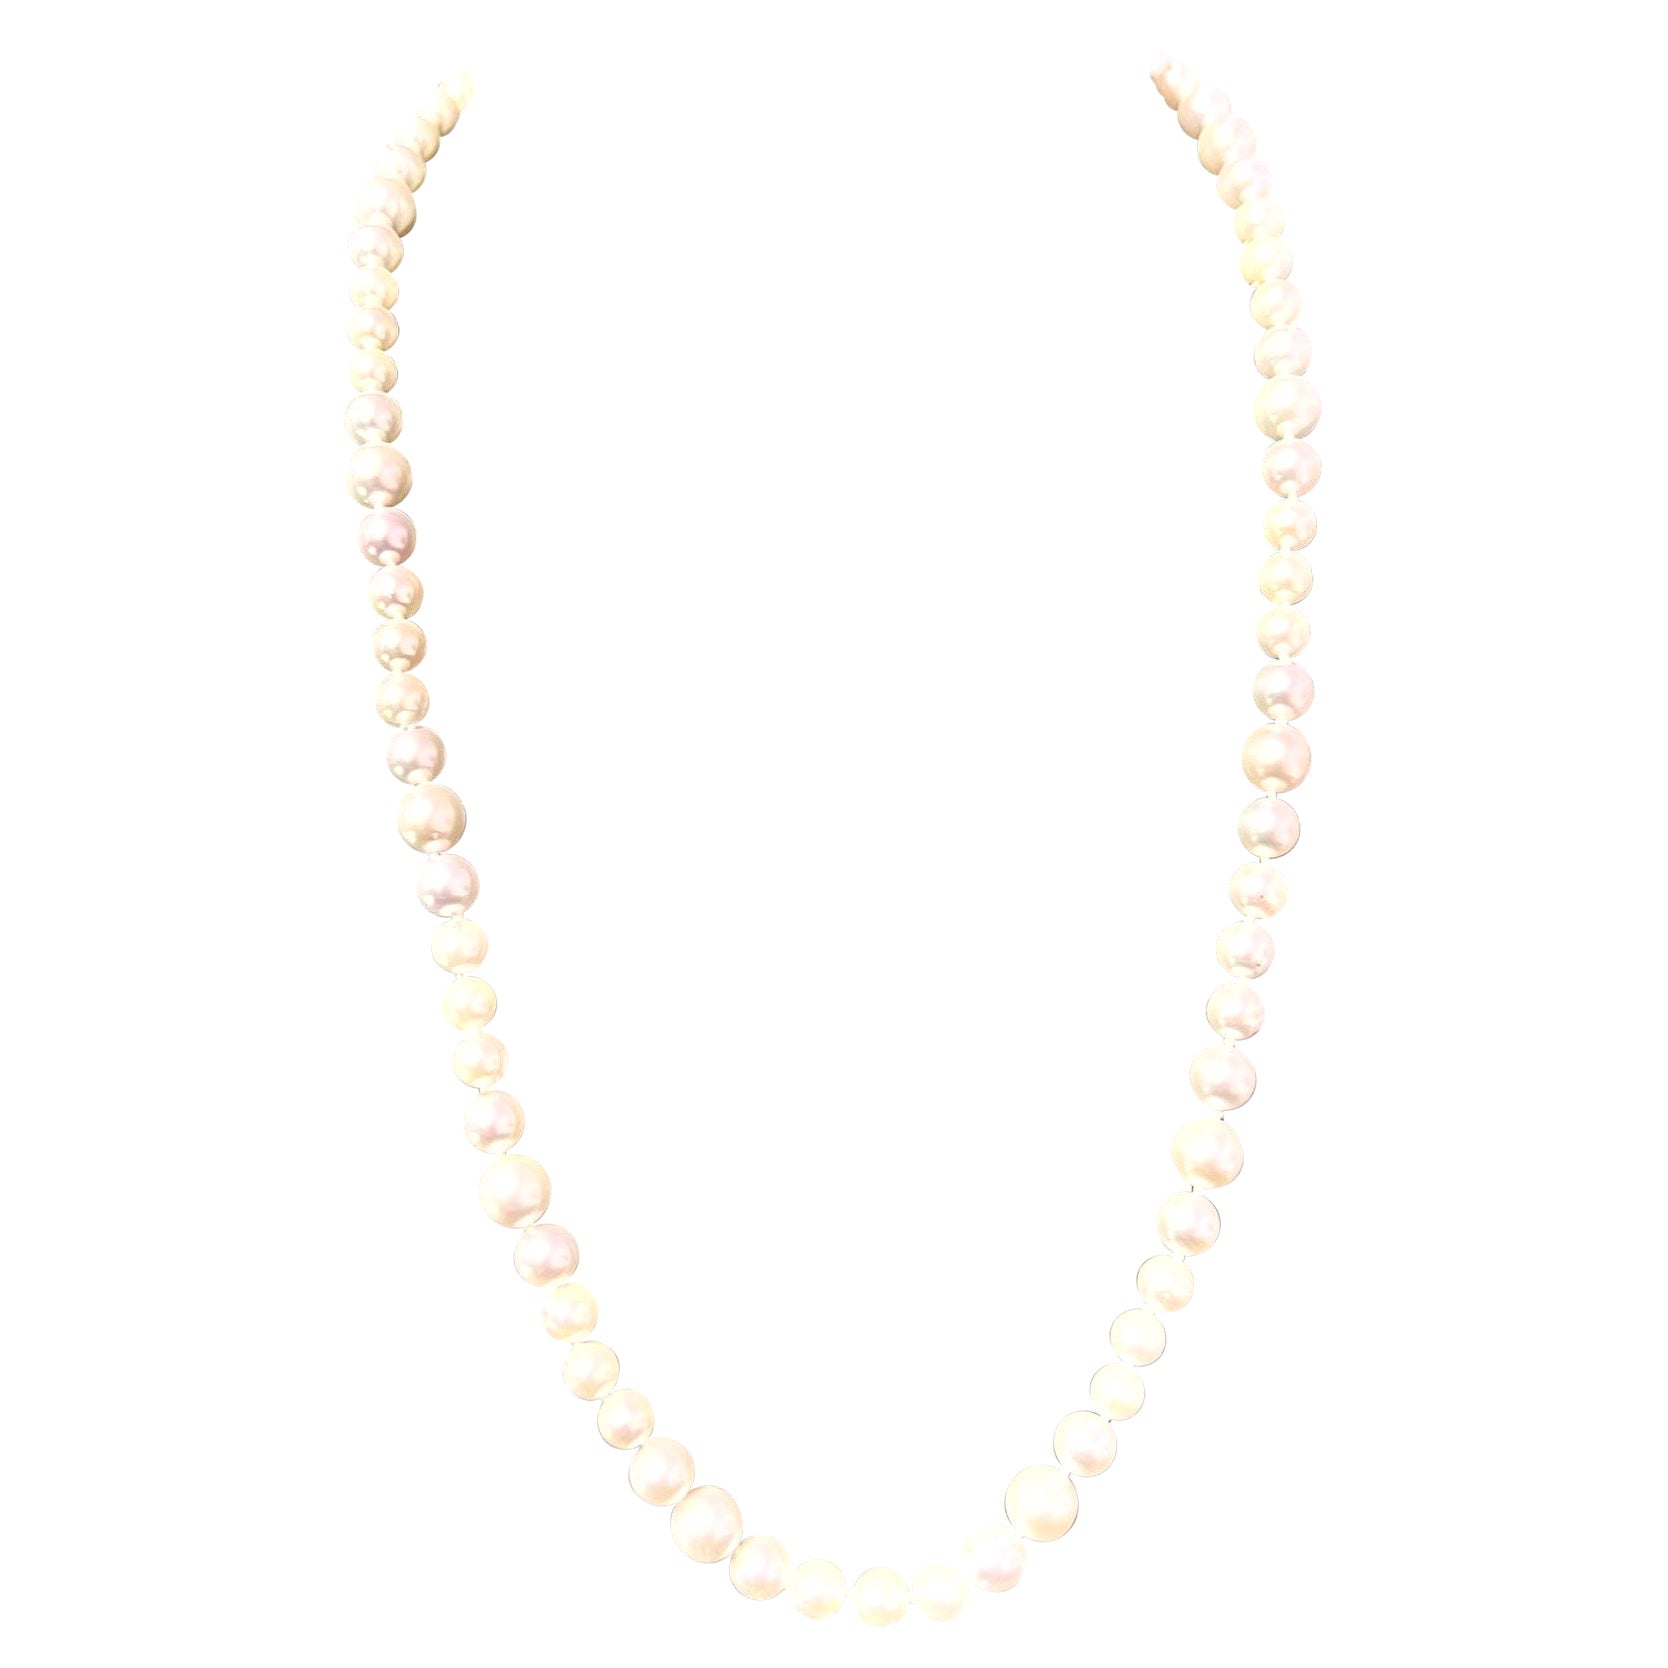 Akoya Pearl Necklace 21" 14k Gold 8 mm AAA Certified